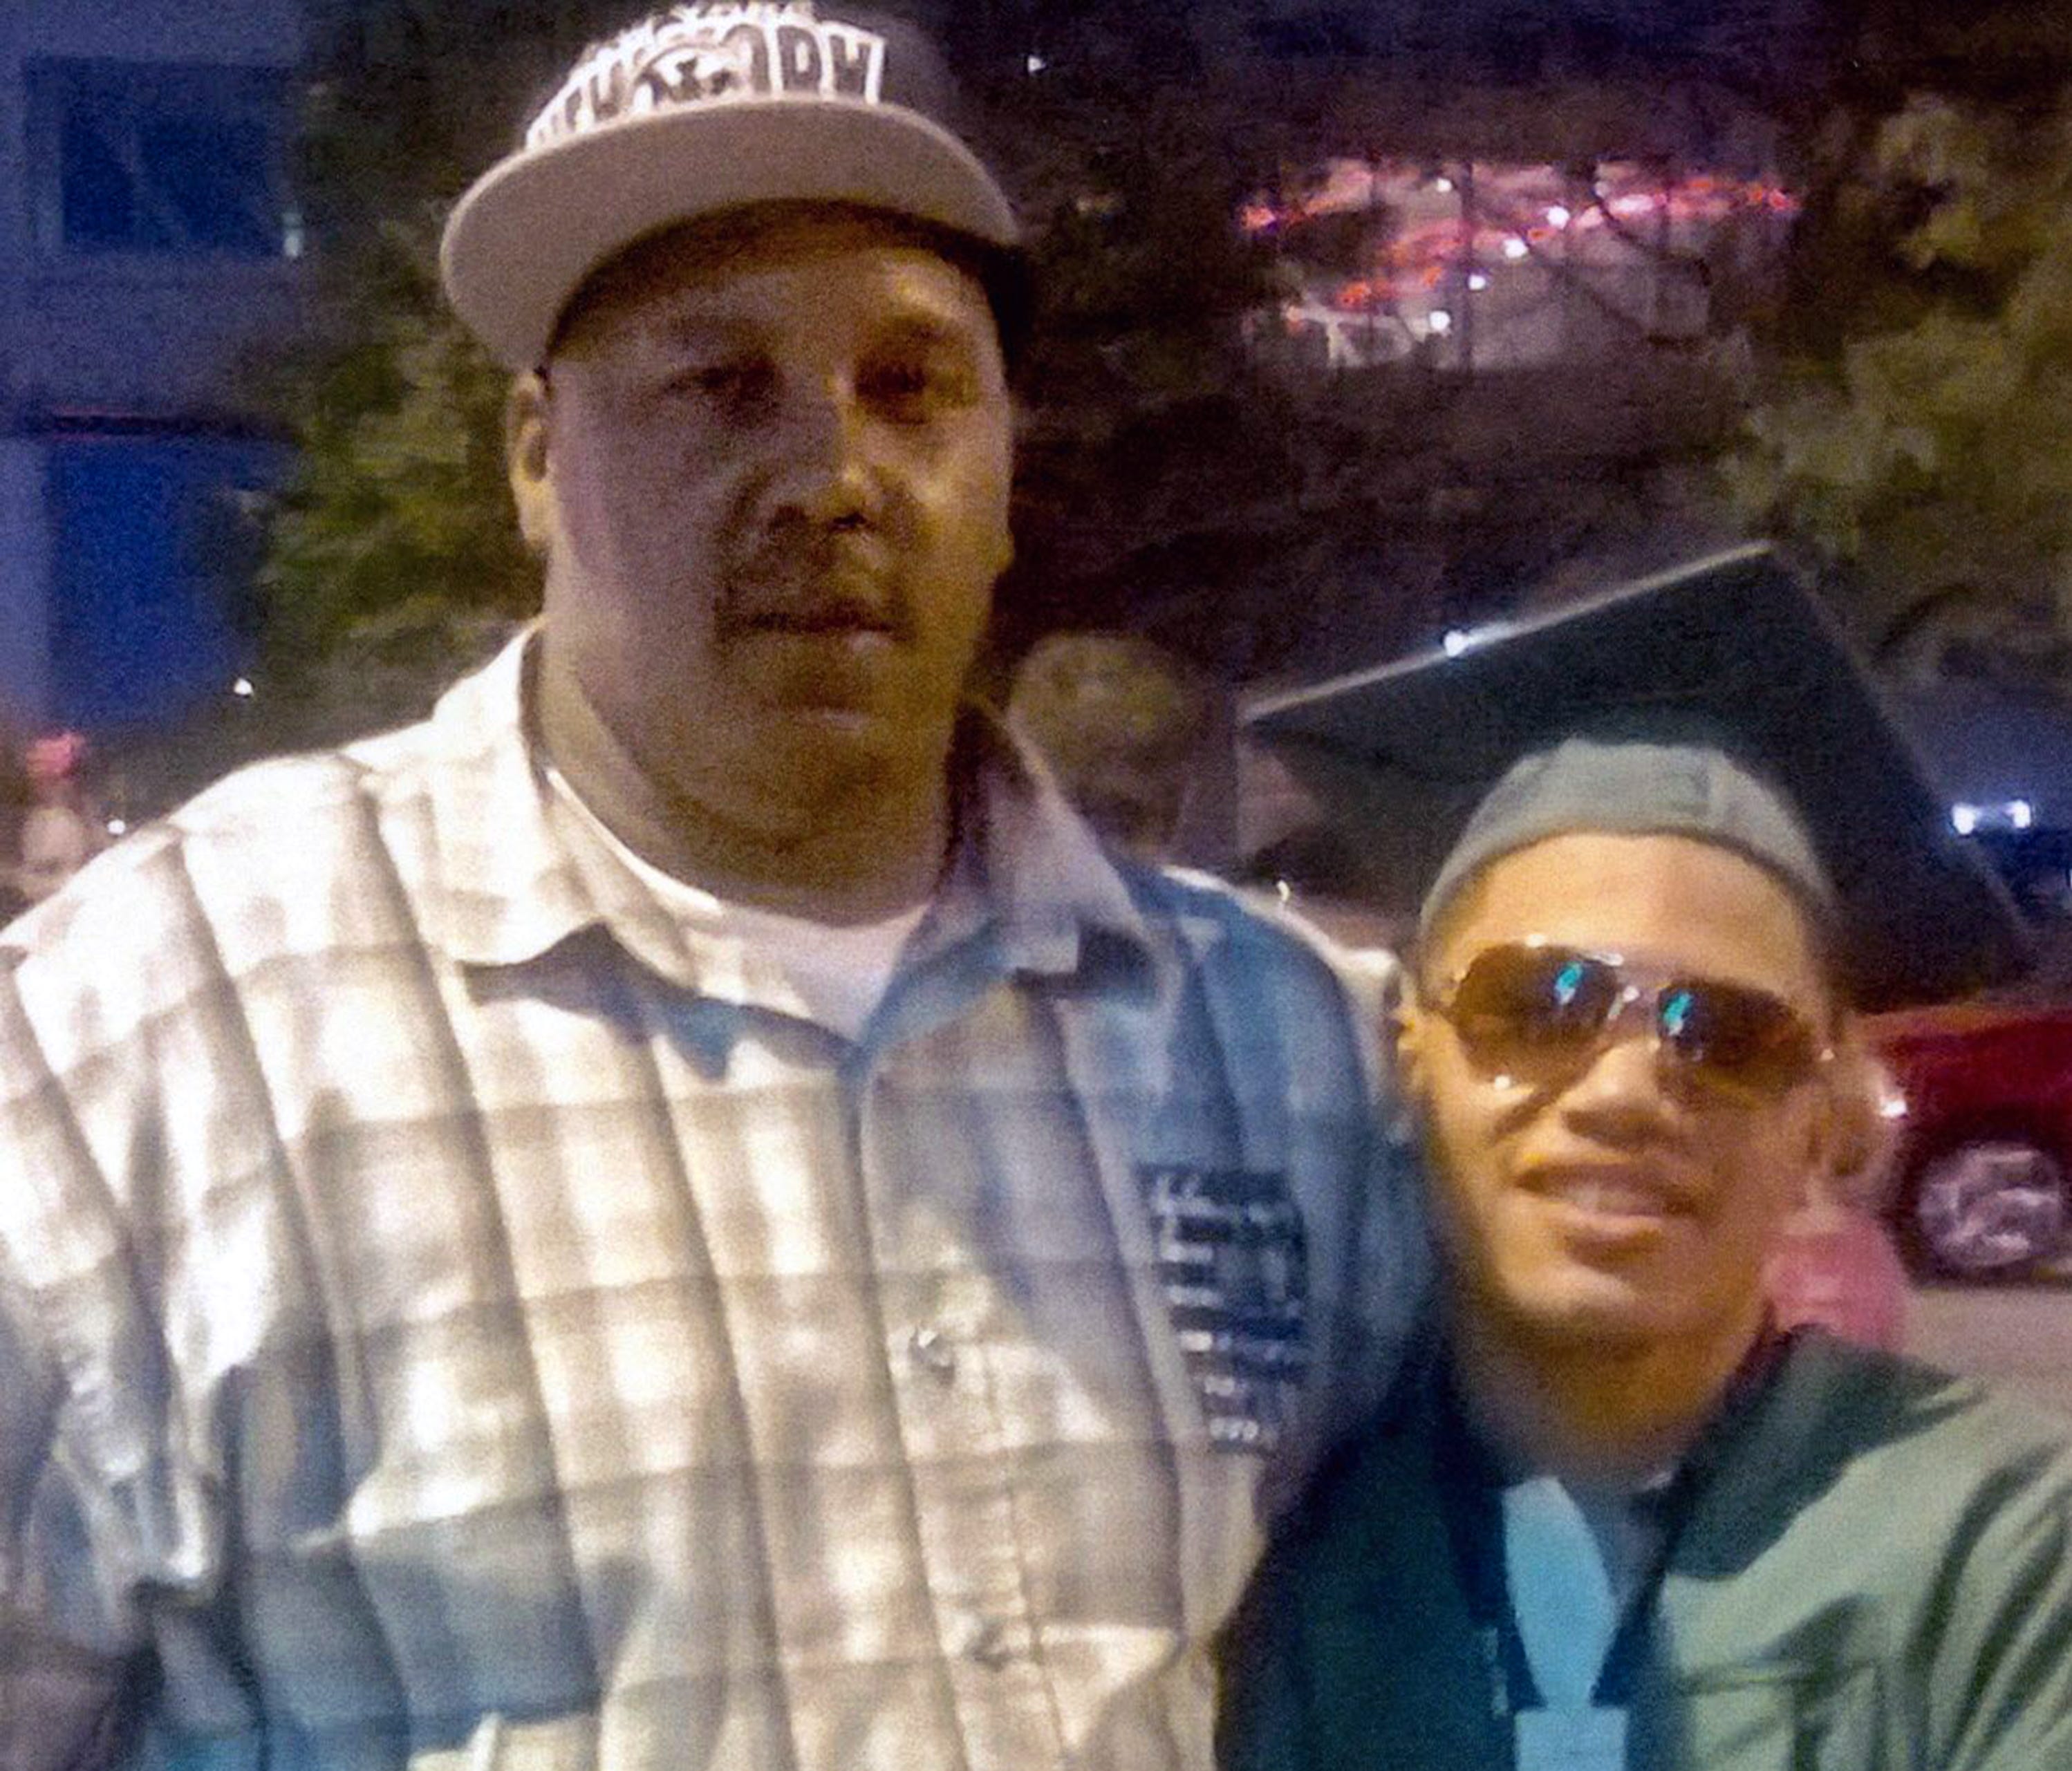 Terrill Thomas, left, stands with his 20-year-old son, also named Terrill, at the son's high school graduation in 2014. The father died in April 2016 while in Milwaukee County Jail.